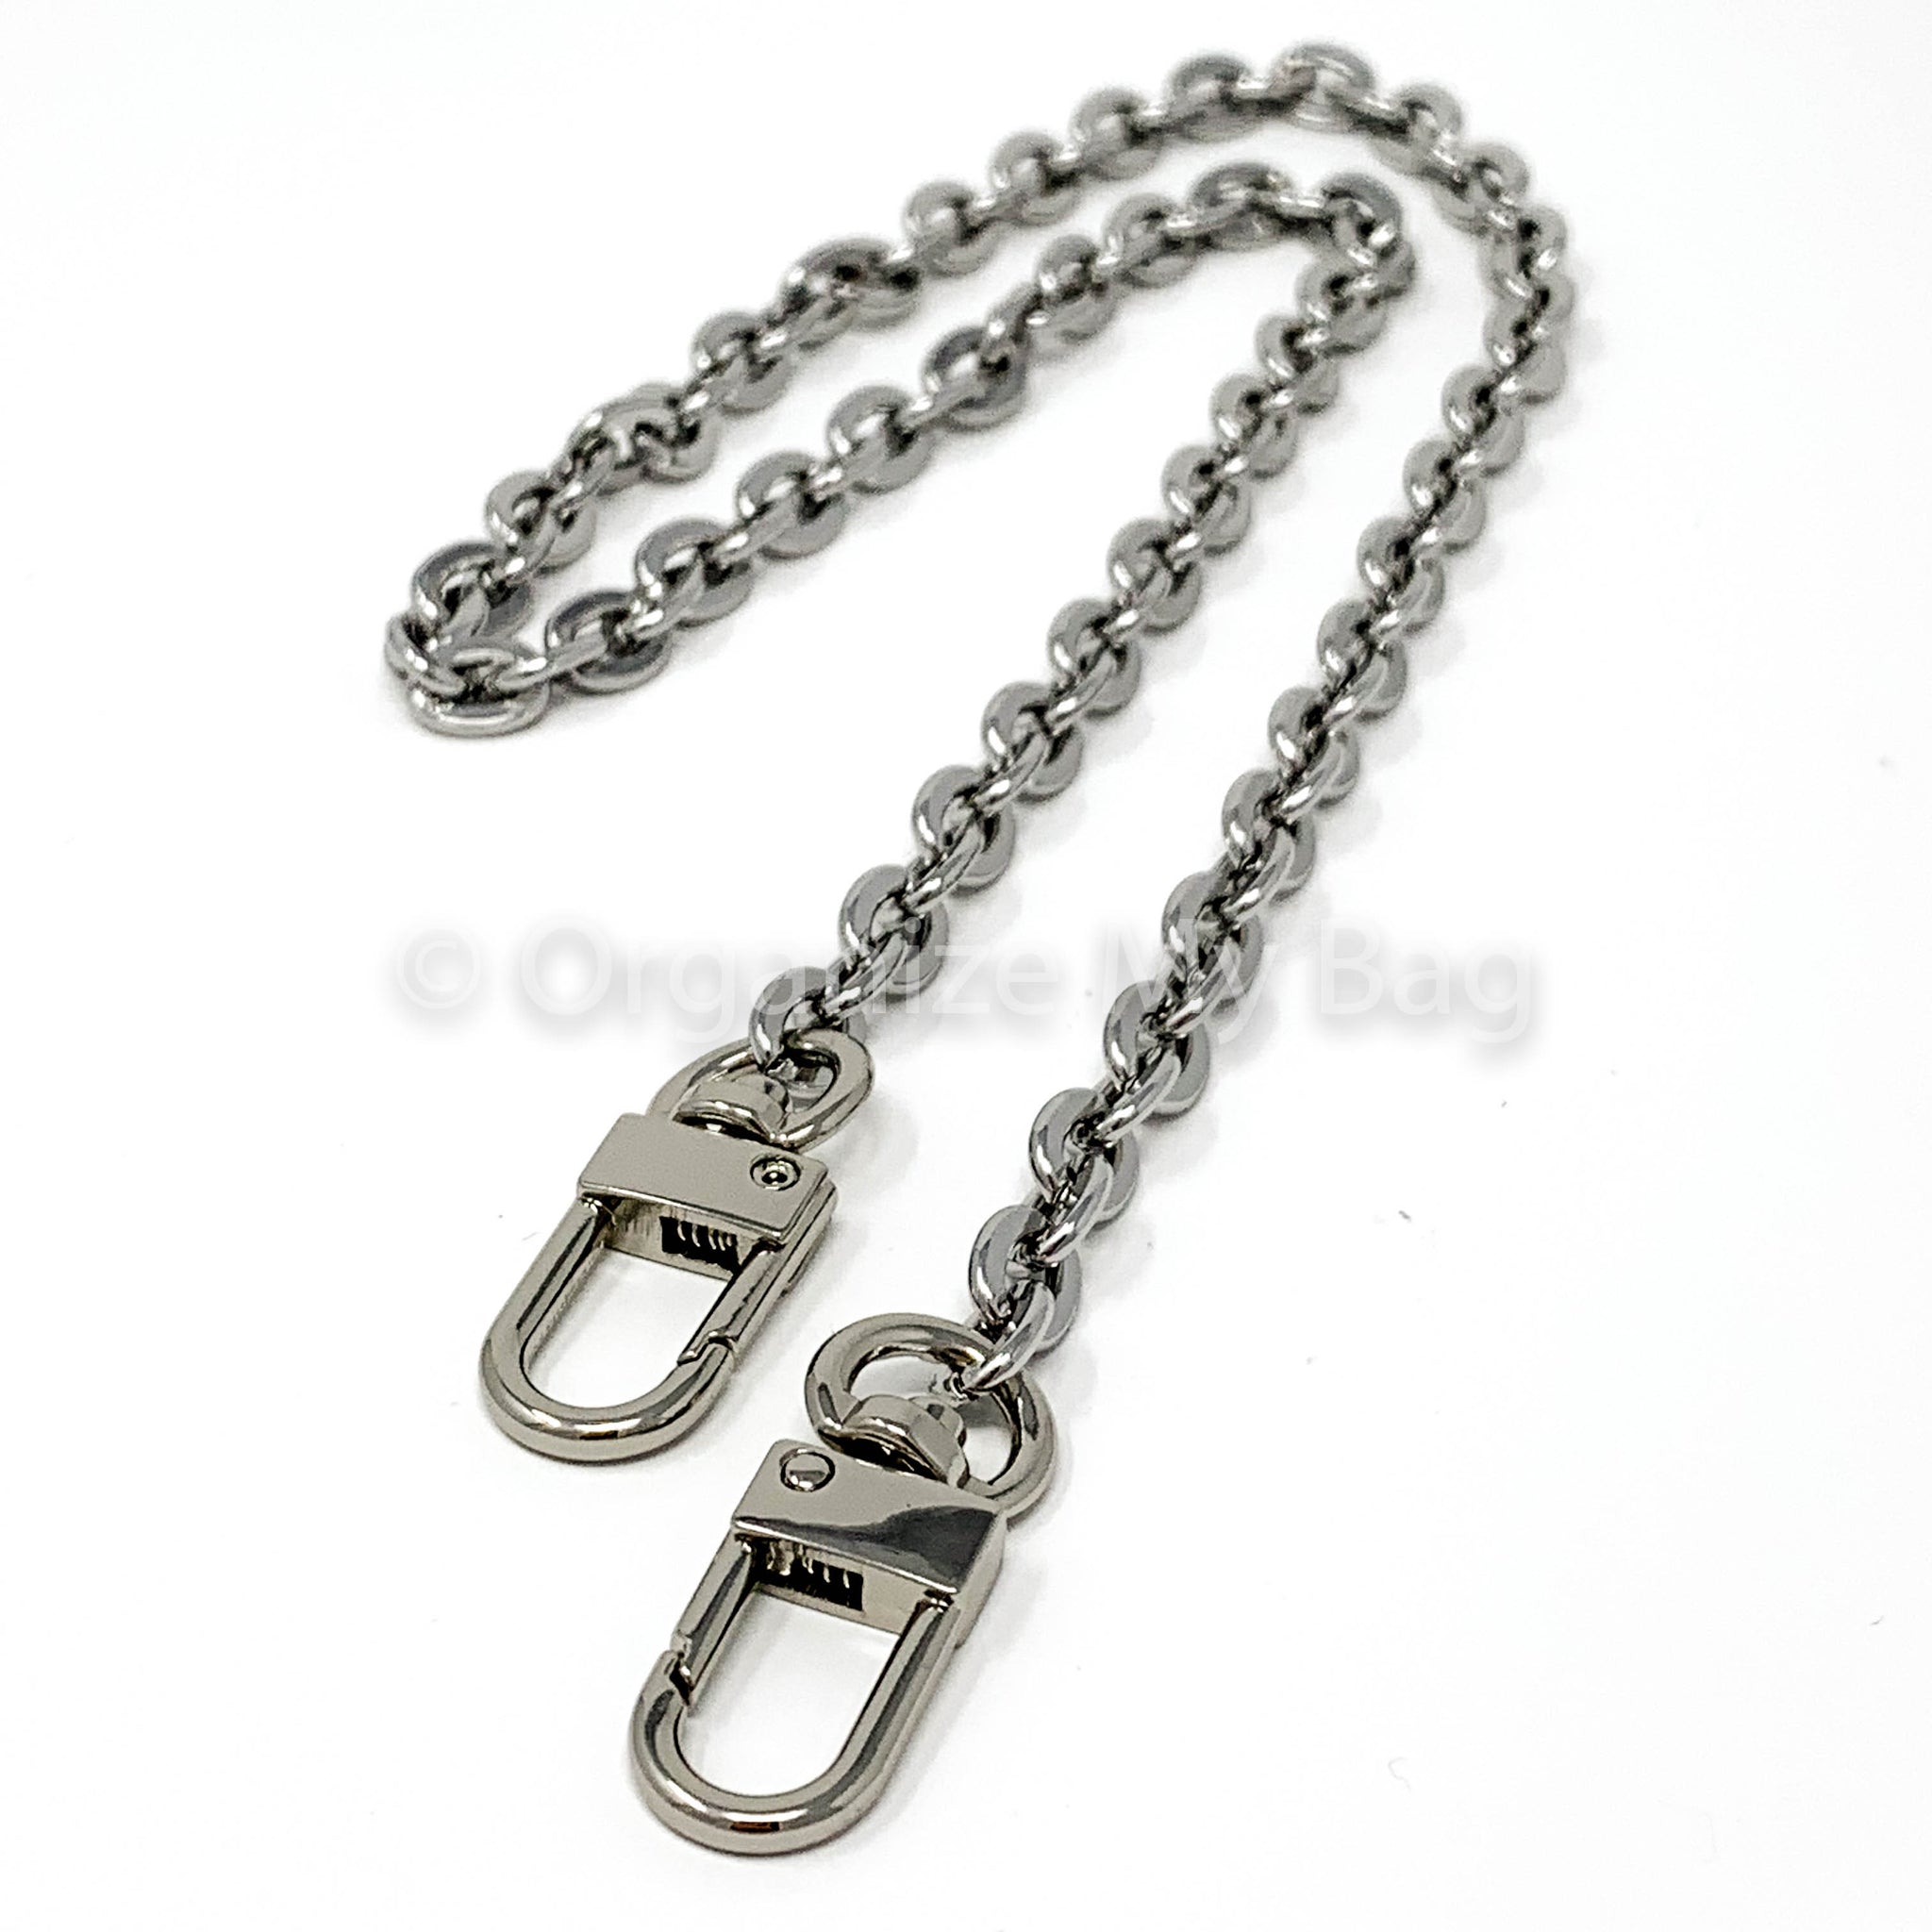 Buy Luxury Shoulder Strap Oval Chain Gold or Silver for Your Bags